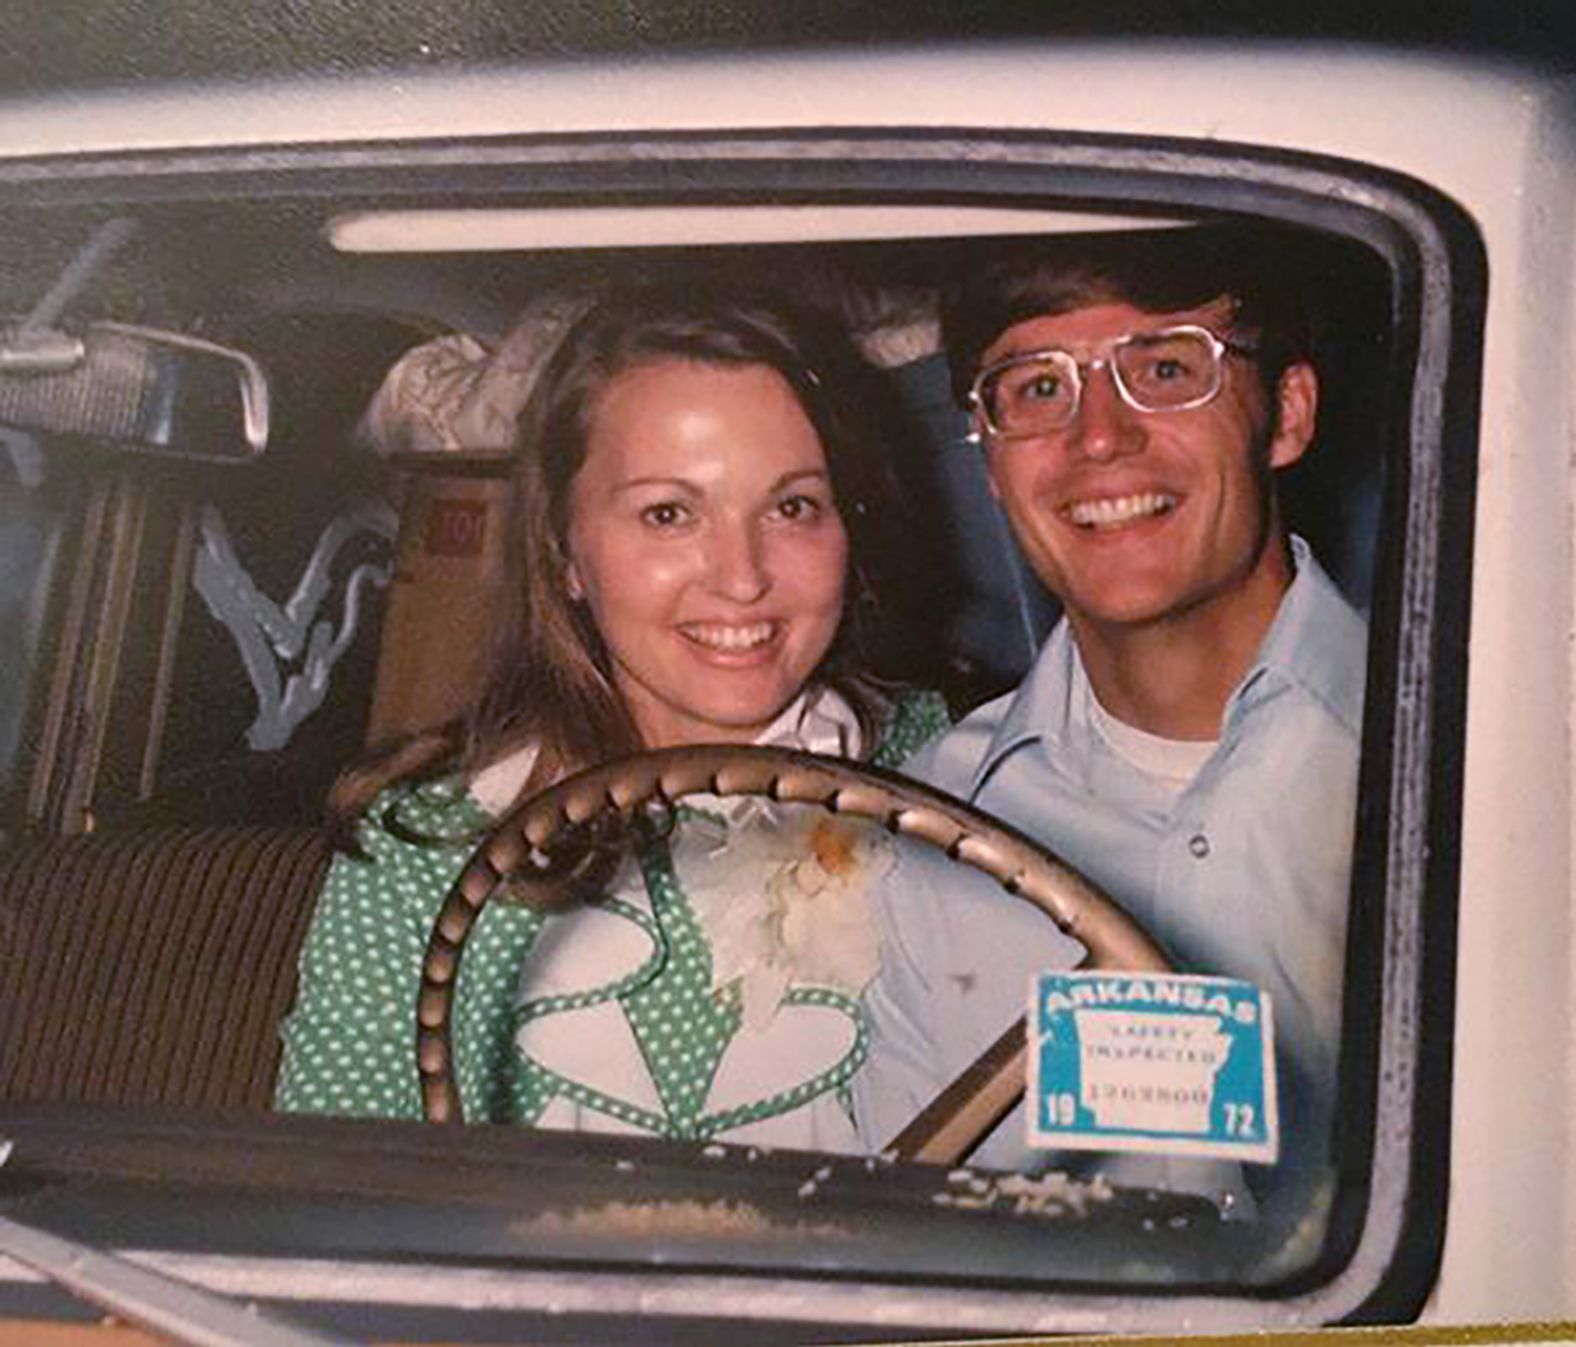 Hutchinson and his wife, Susan, ride in a car together in the early 1970s.